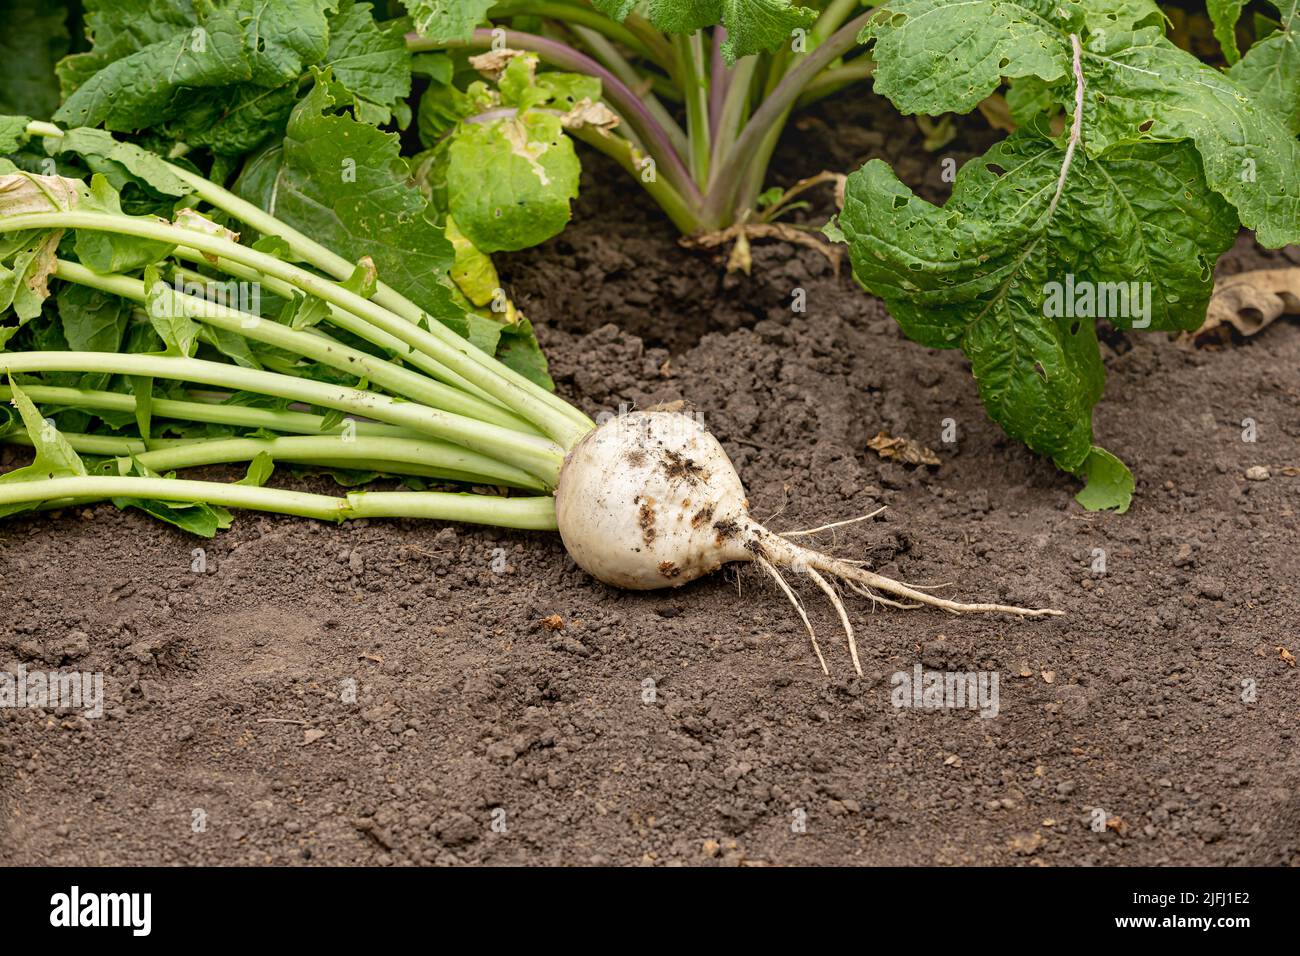 Large white turnip growing in garden. Gardening, organic produce and home garden concept. Stock Photo